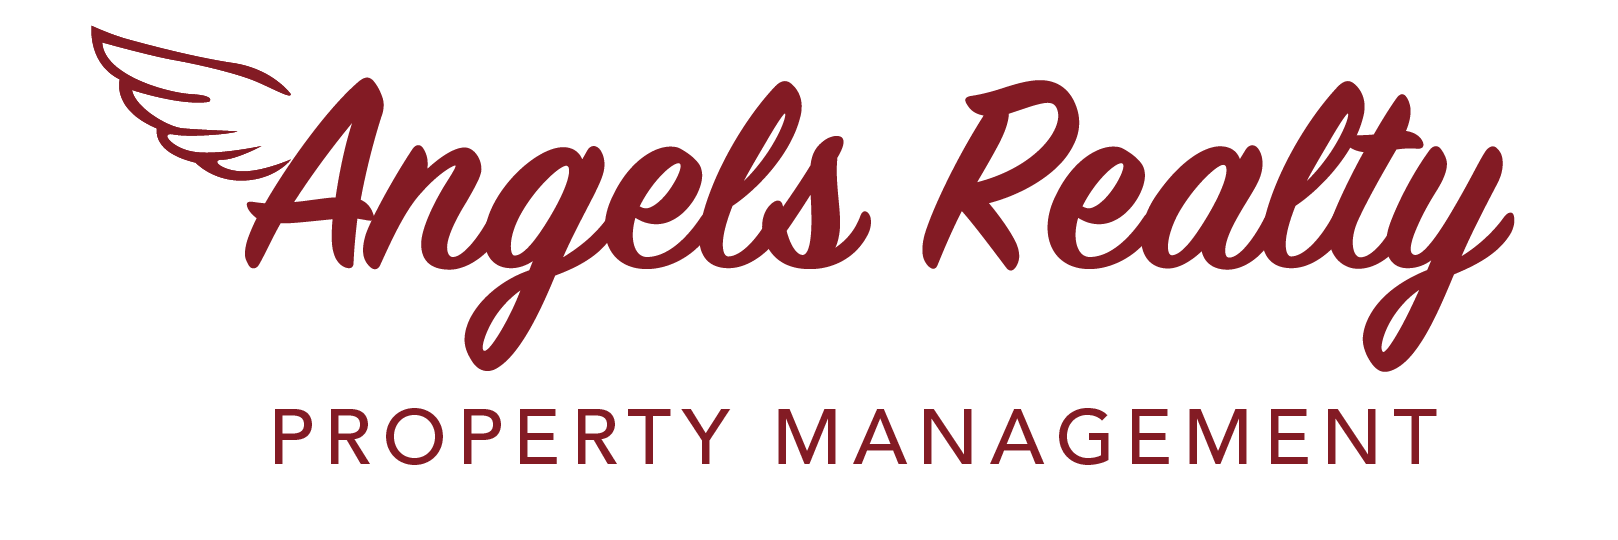 Contact – Angels Realty